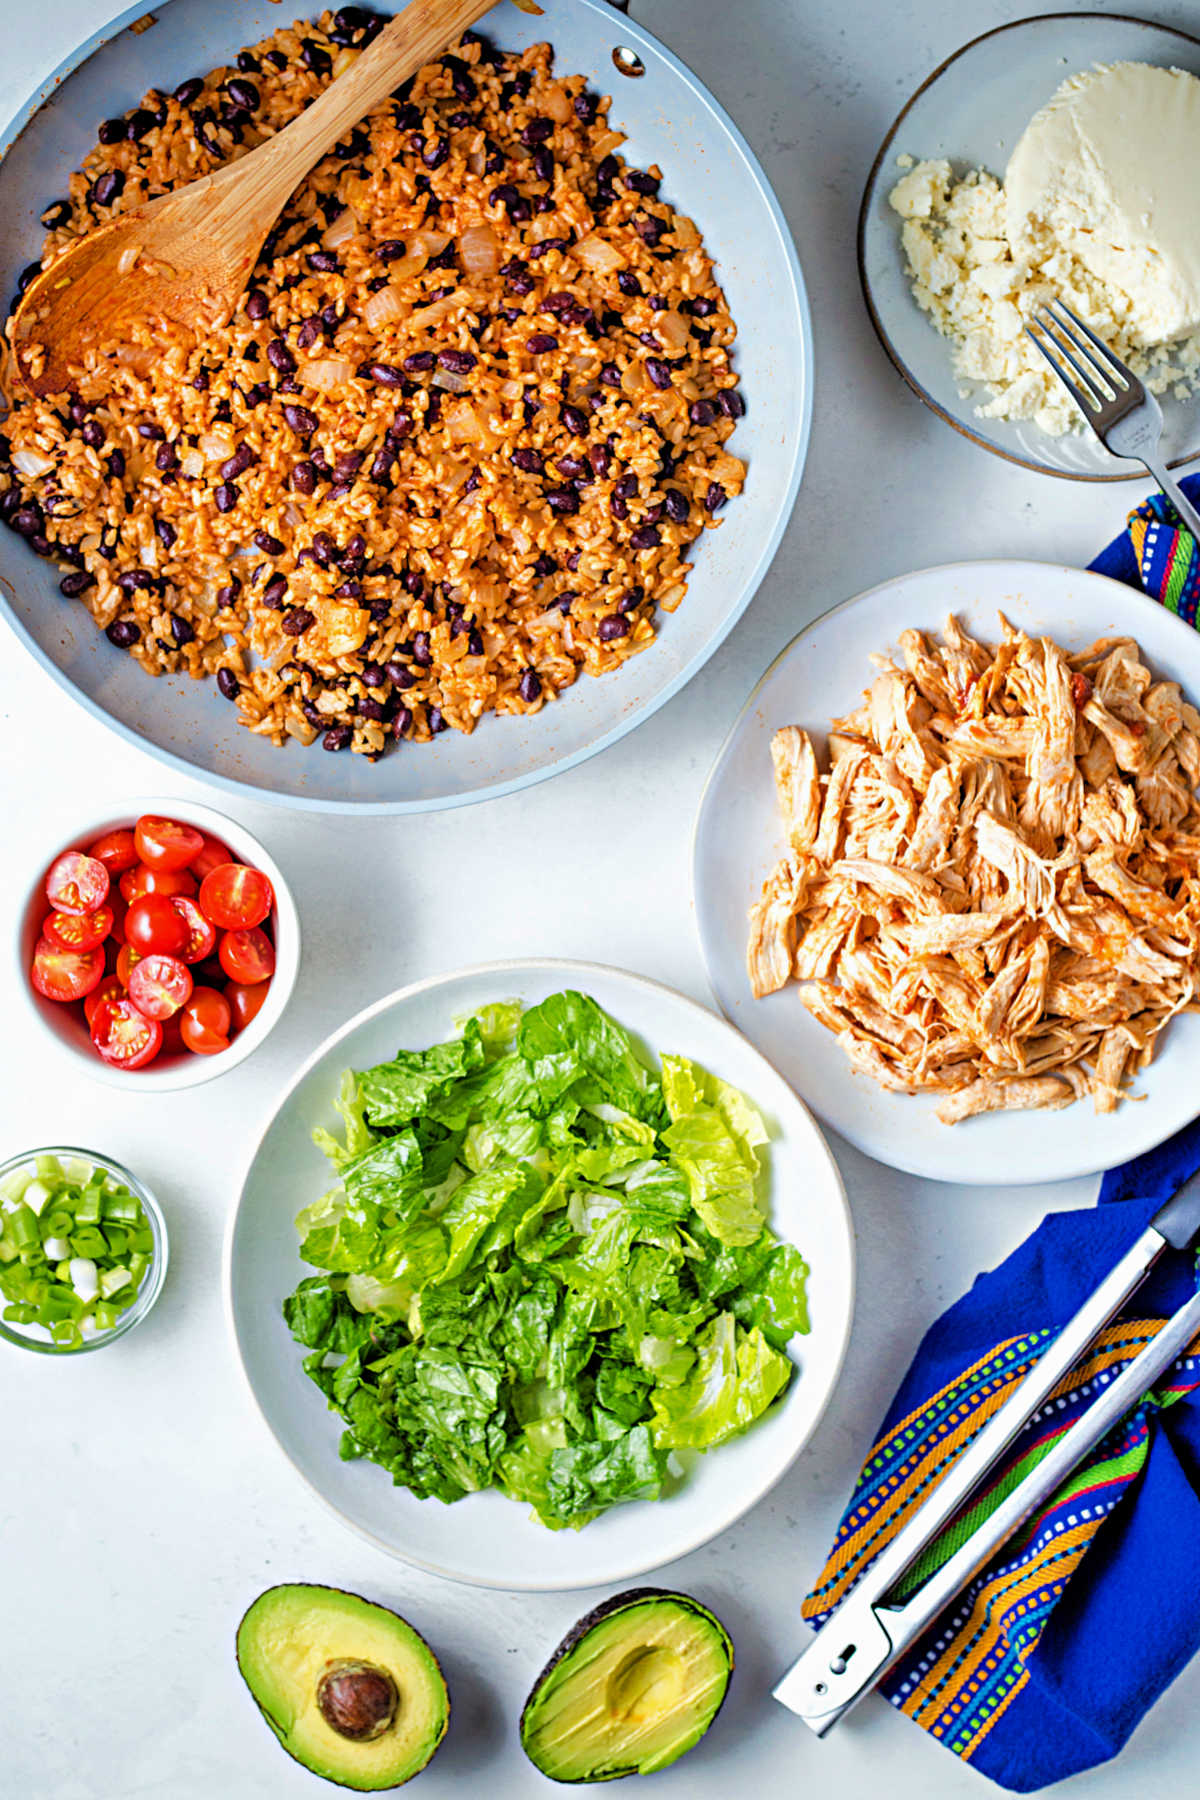 ingredients for building chicken burrito bowls on a table: rice and beans; shredded chicken; lettuce; tomatoes; avocado; queso fresca cheese.